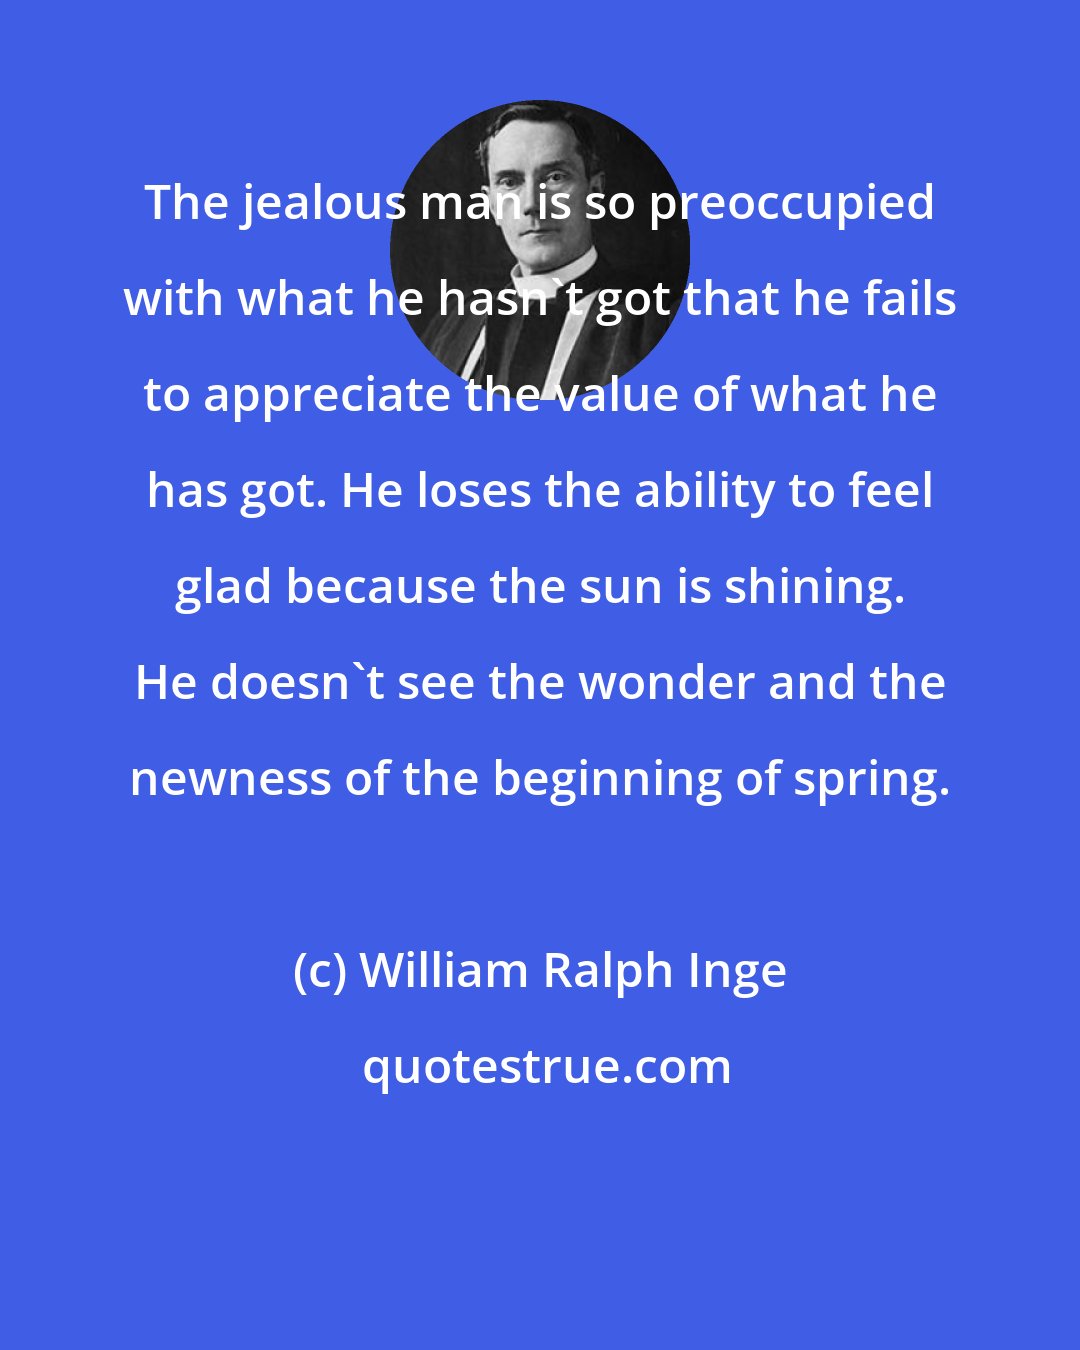 William Ralph Inge: The jealous man is so preoccupied with what he hasn't got that he fails to appreciate the value of what he has got. He loses the ability to feel glad because the sun is shining. He doesn't see the wonder and the newness of the beginning of spring.